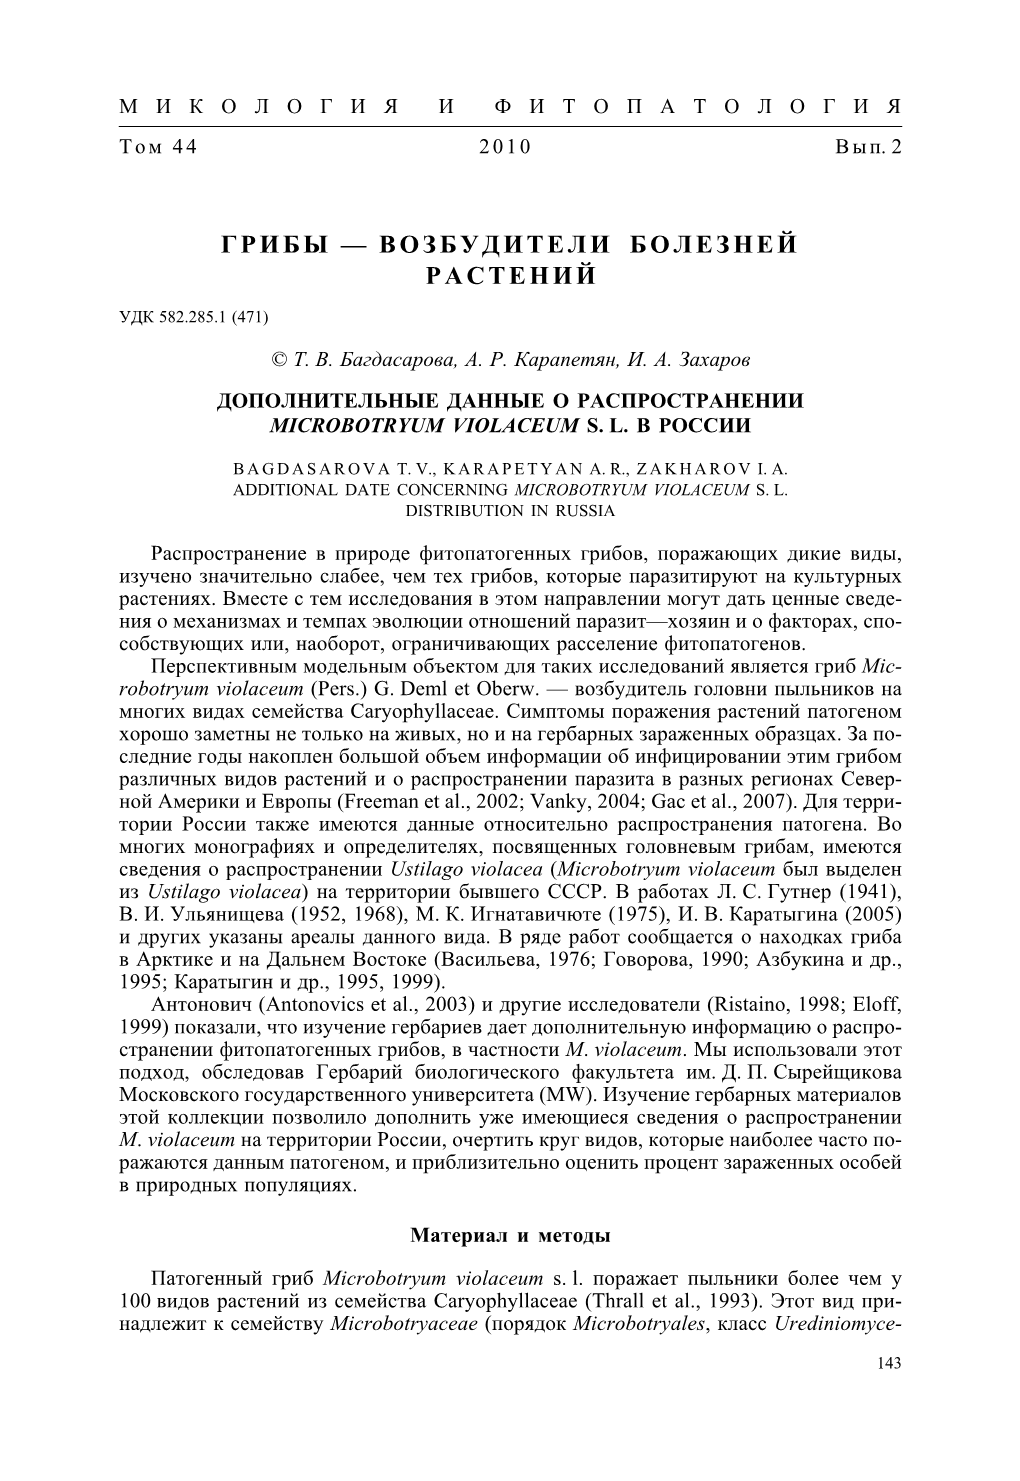 Additional Date Concerning Microbotryum Violaceum S. L. Distribution in Russia